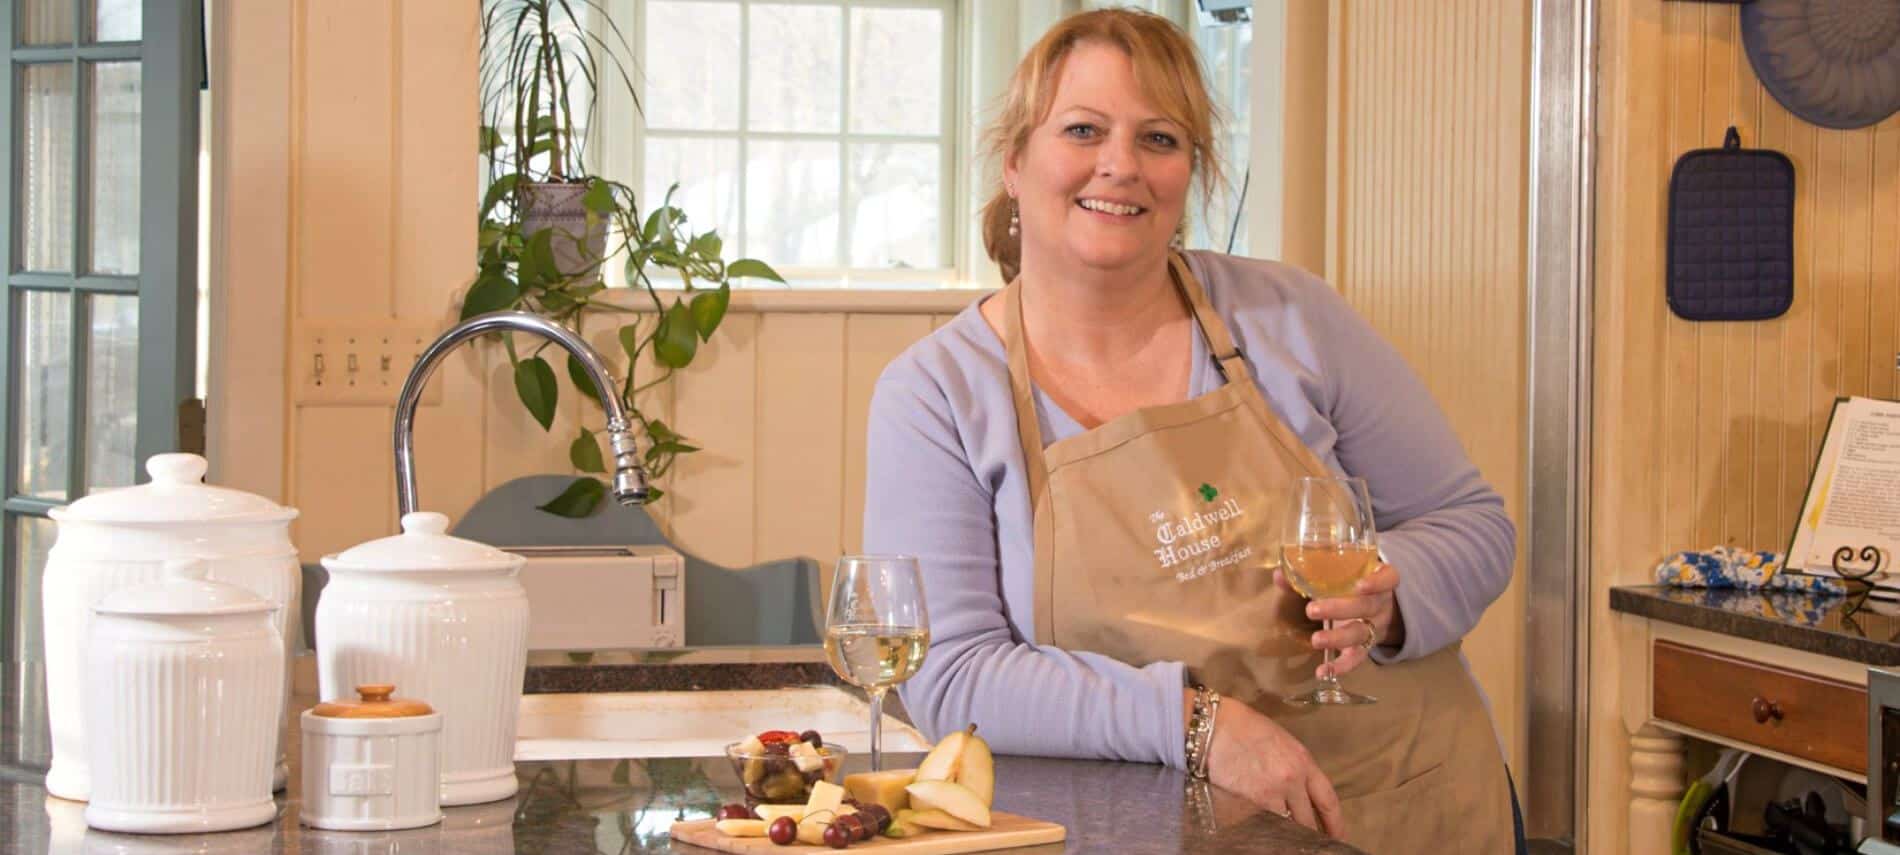 A proud and happy innkeeper smiles as she displays her charming kitchen, a selection of fine foods and wine